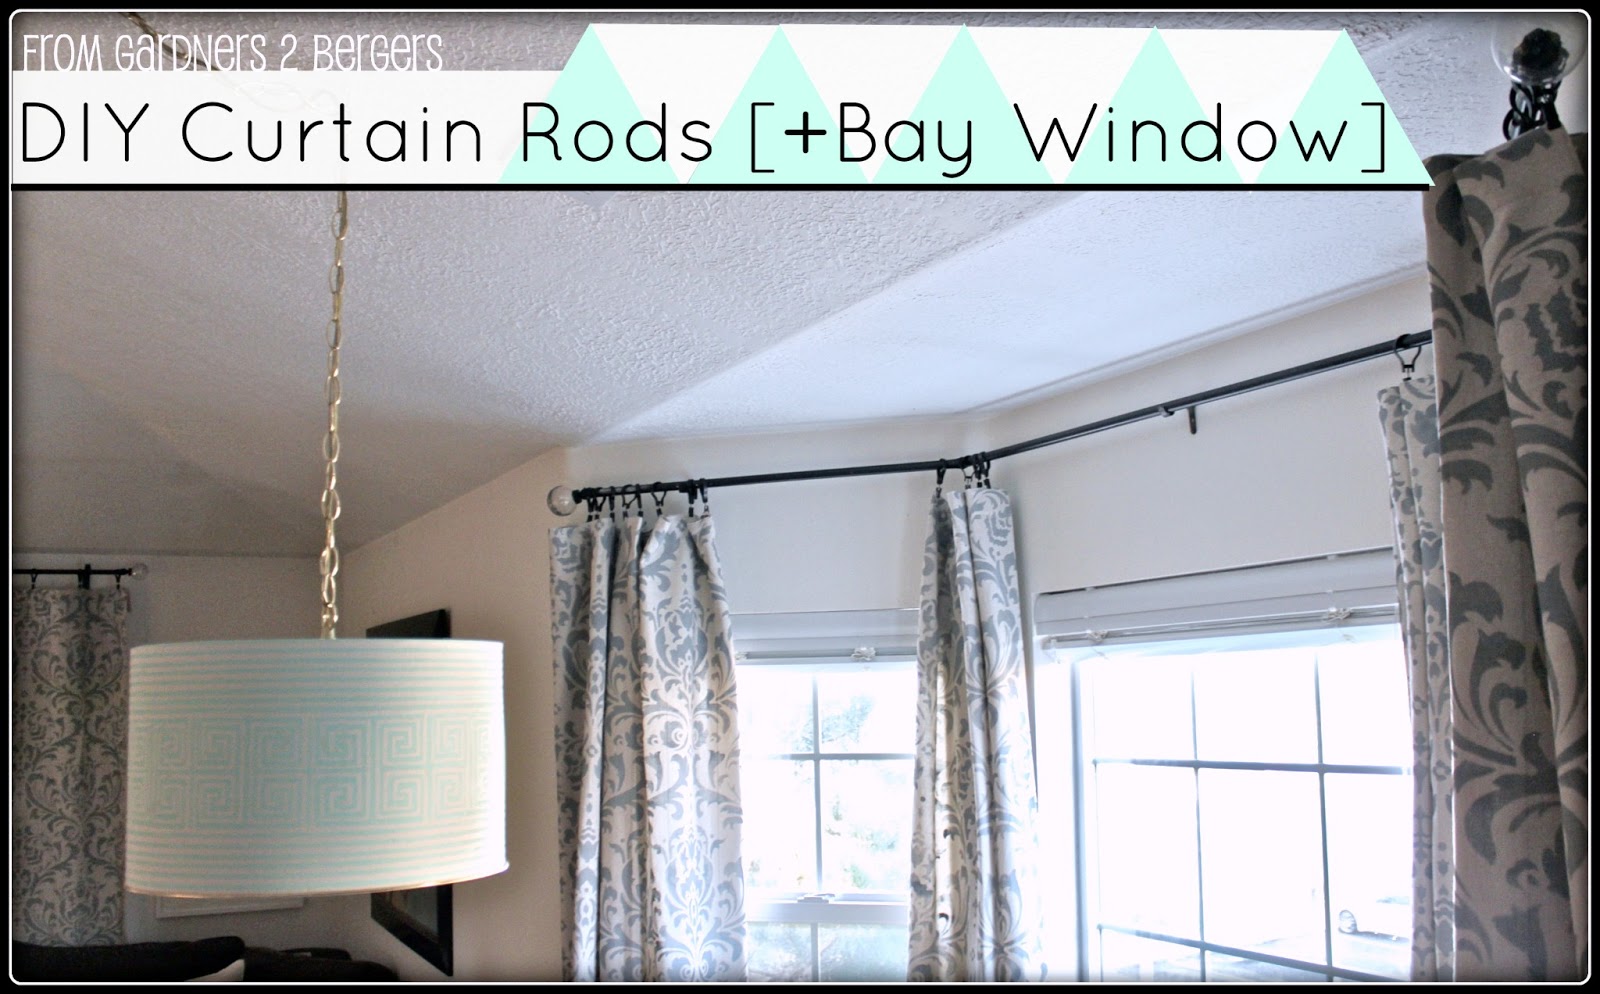 DIY+Curtains-Rods-And-bay-window-tutorial